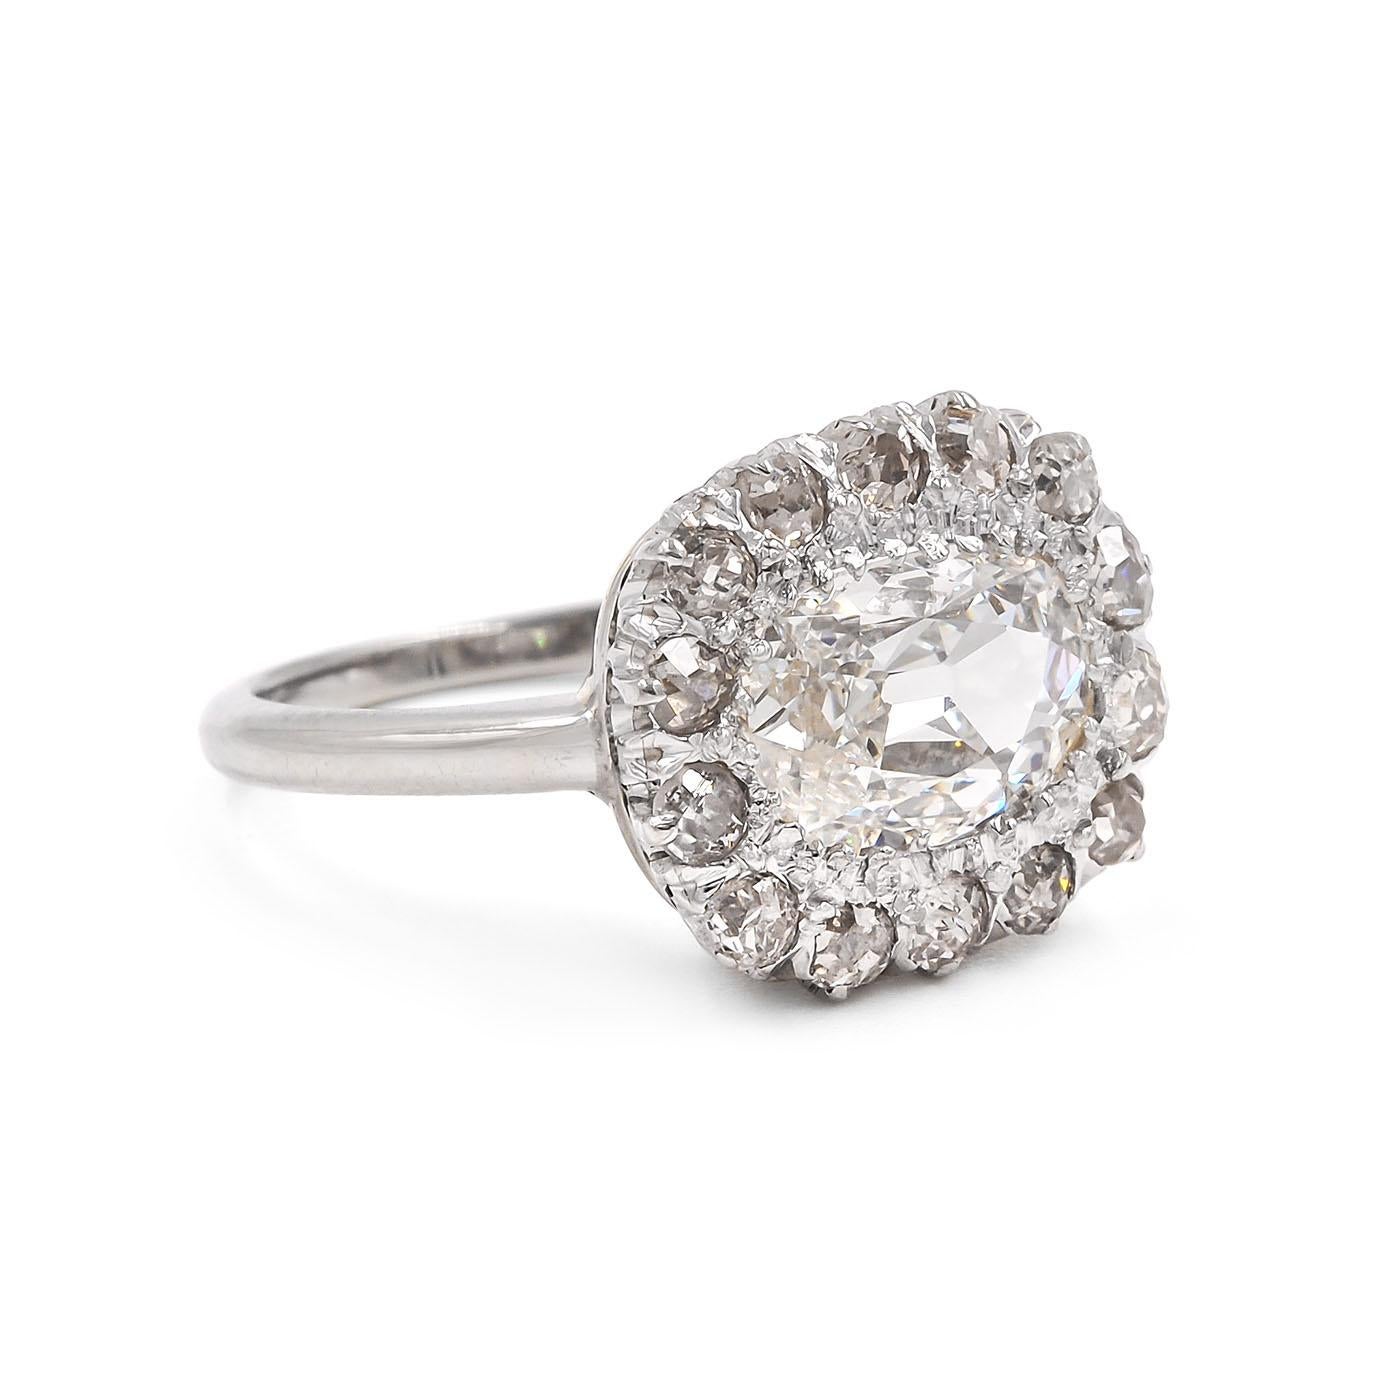 Edwardian era 1.50 Carat Cushion Cut Diamond Cluster Engagement Ring composed of platinum and 18k white gold. Featuring a 1.50 carat Cushion Cut diamond that is GIA certified I color & SI2 clarity, set horizontally and surrounded by 14 Old Mine Cut